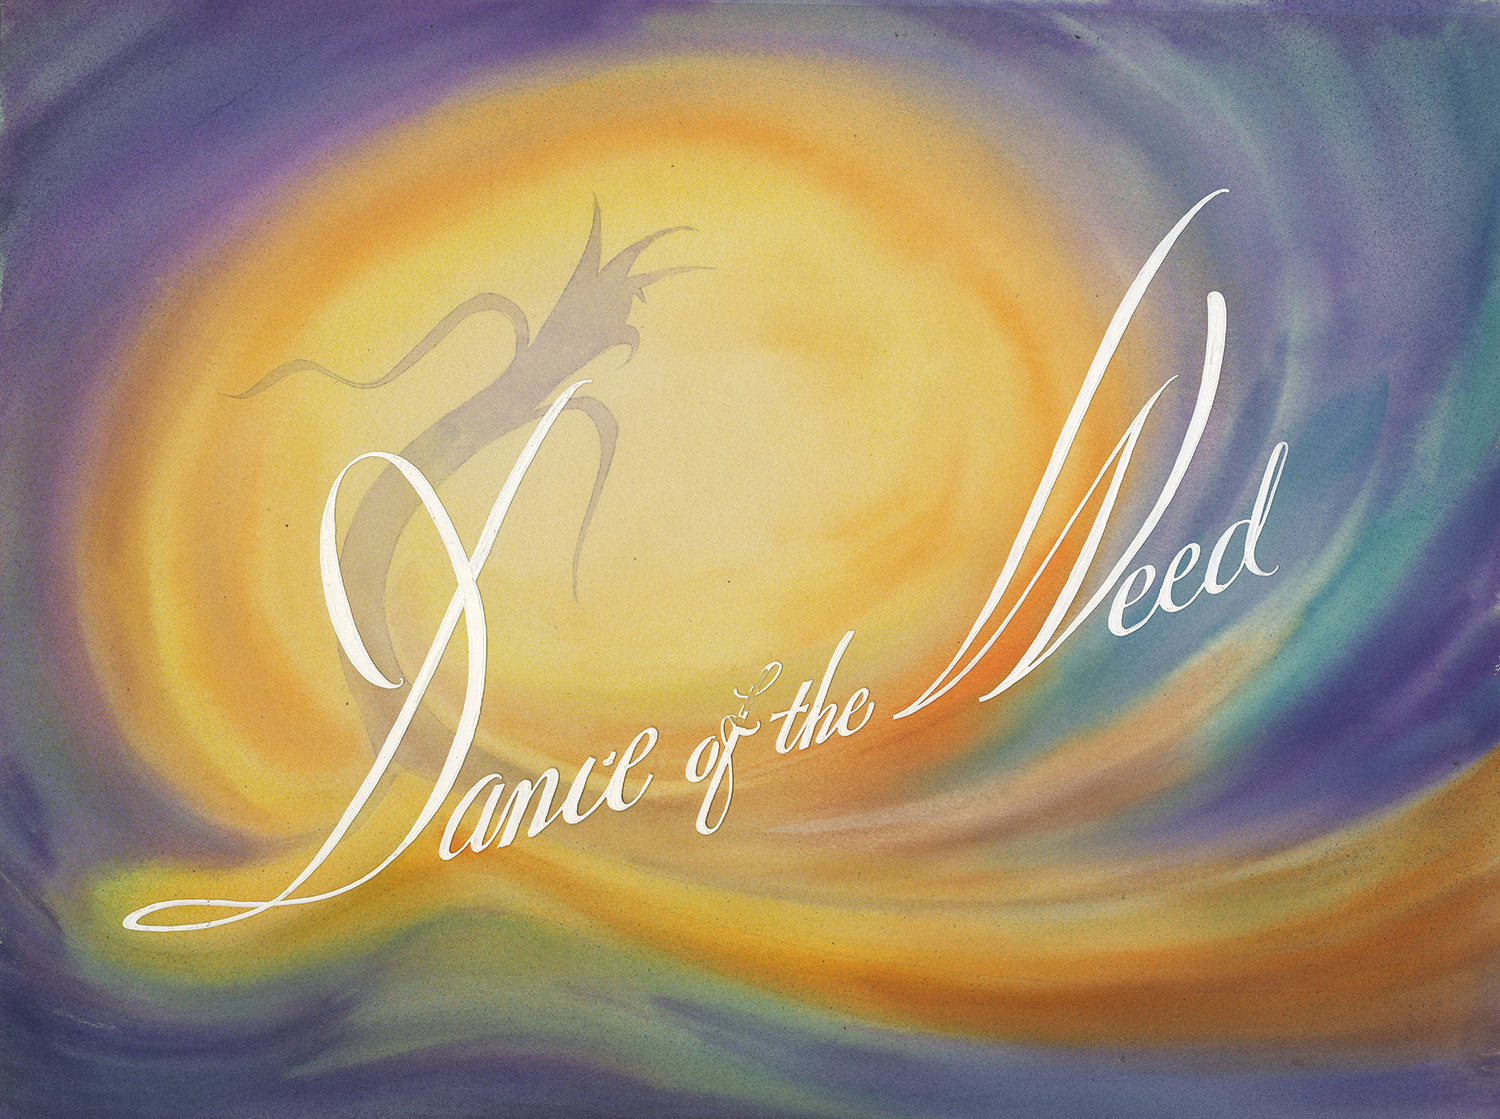 Dance of the Weeds Title Card - ID: janmgm9177.